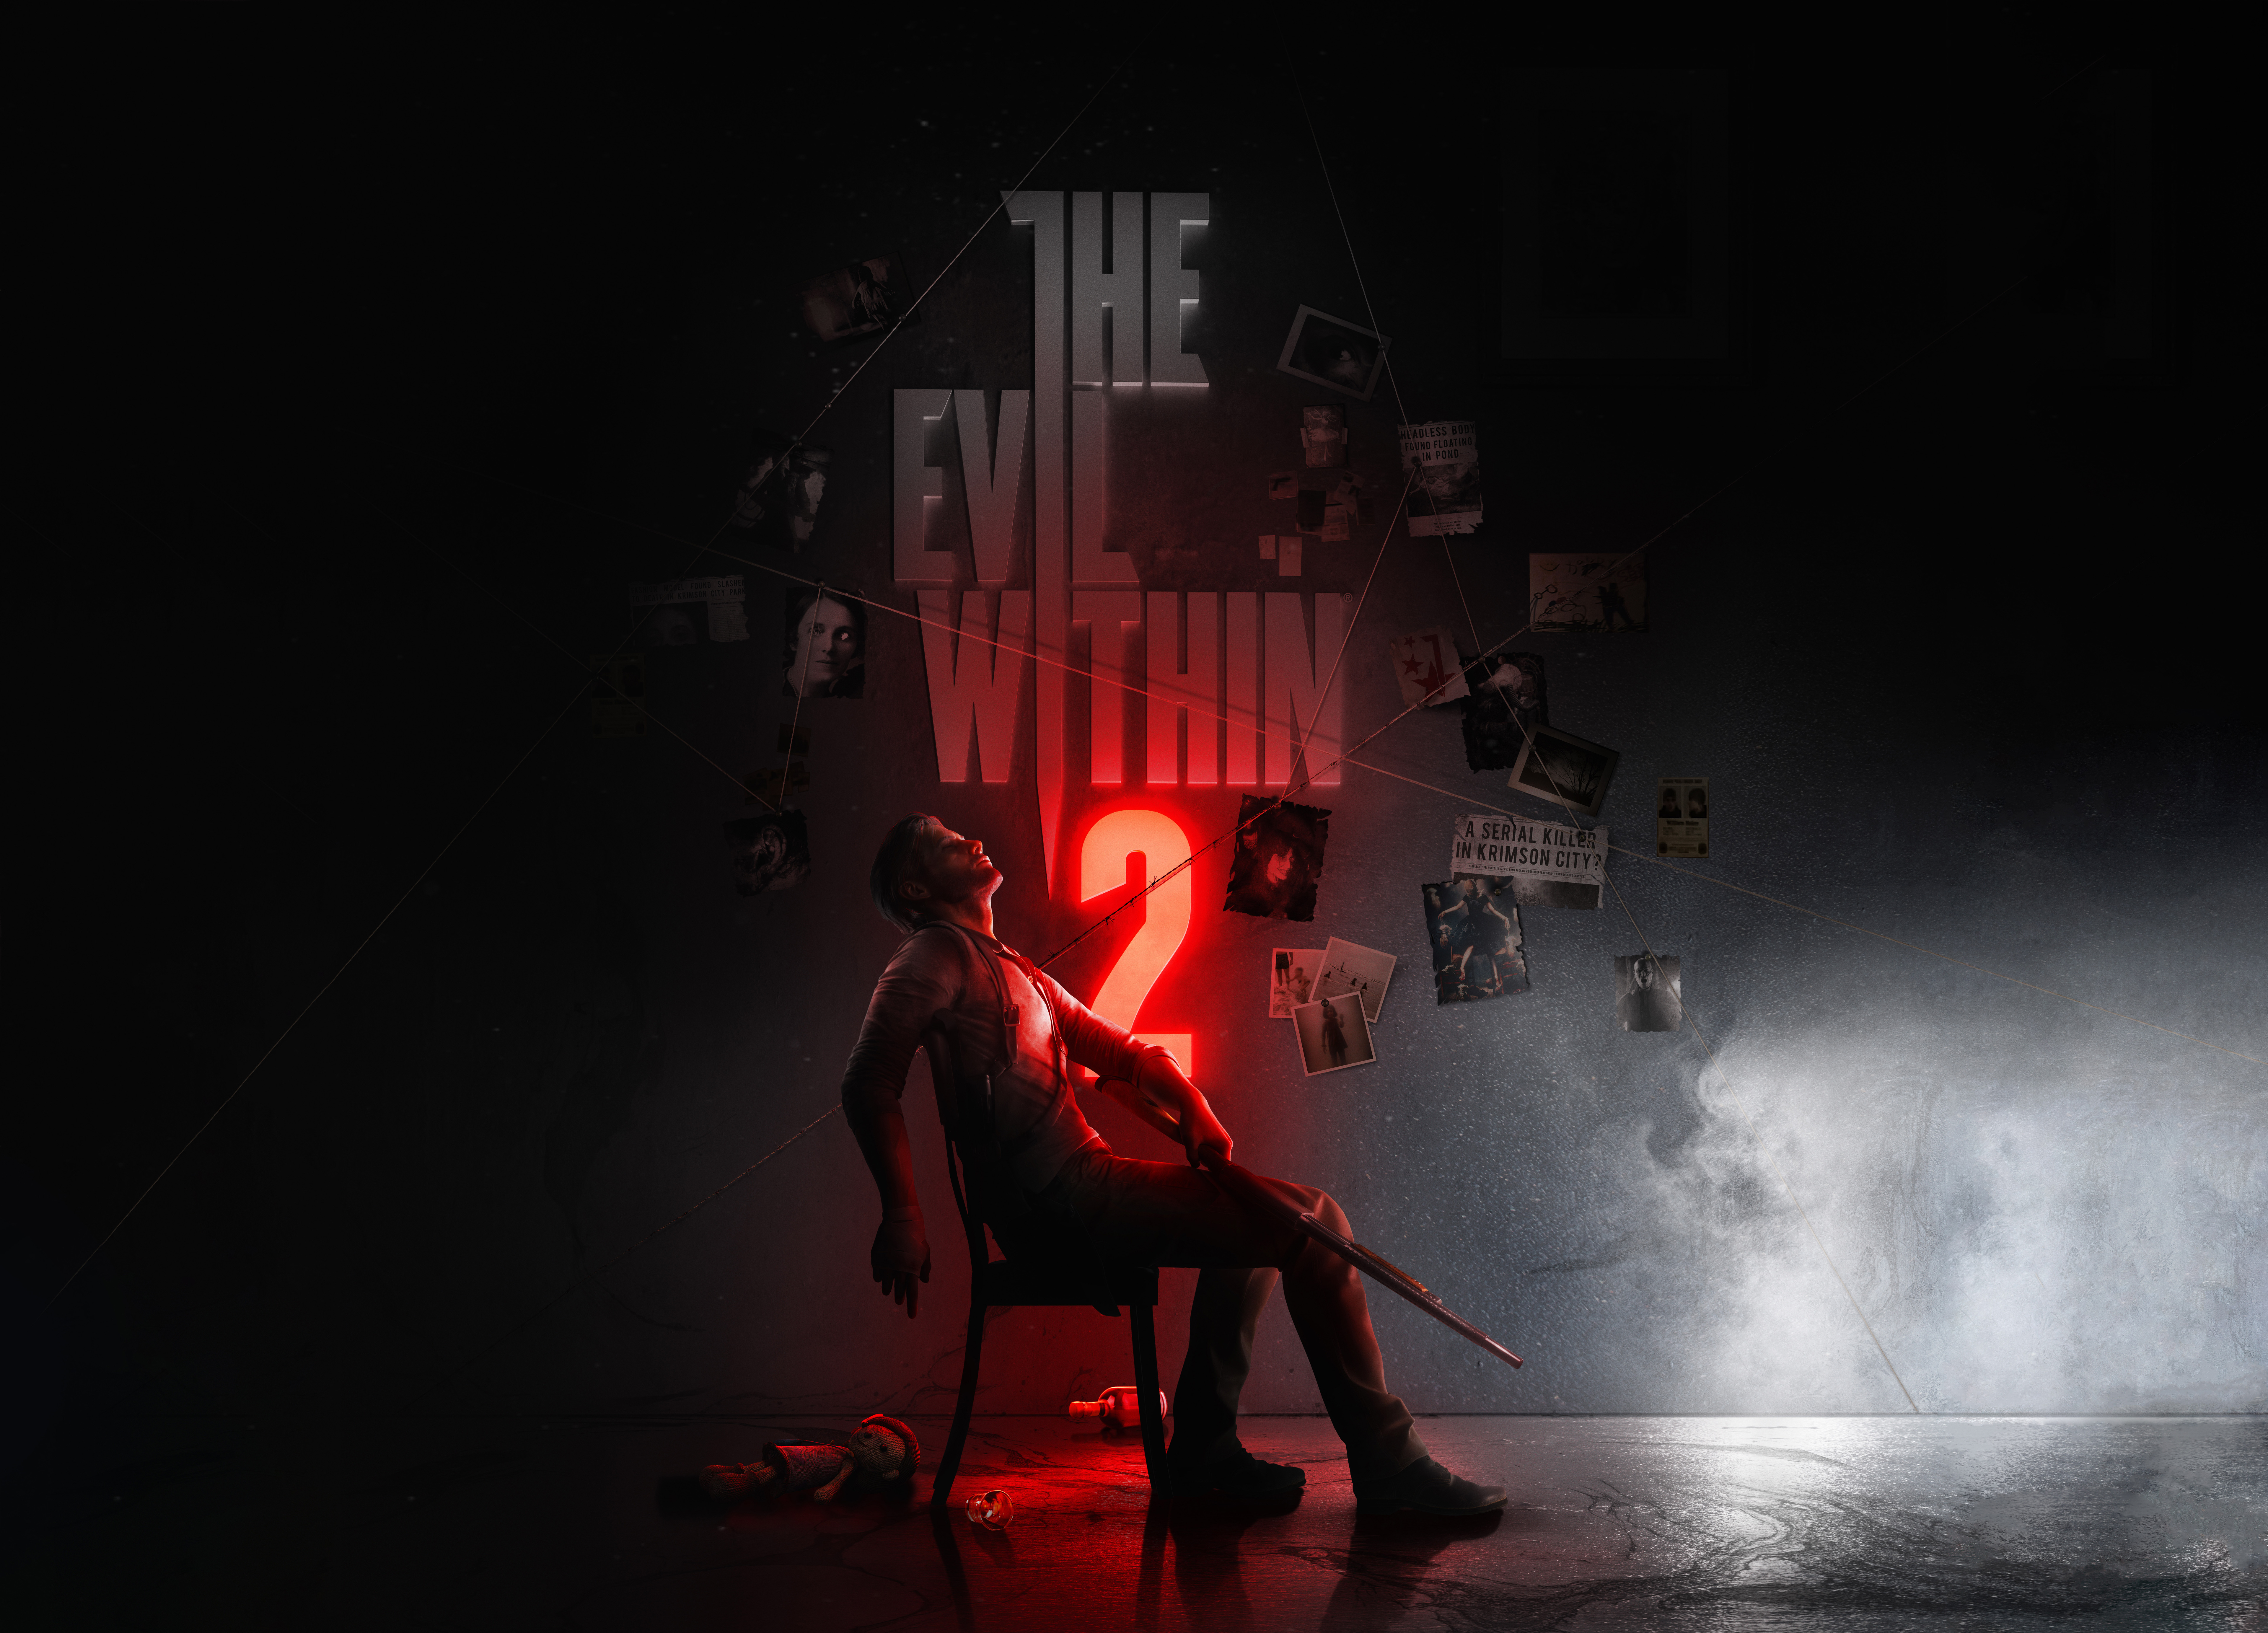 download the evil within 2 metacritic for free